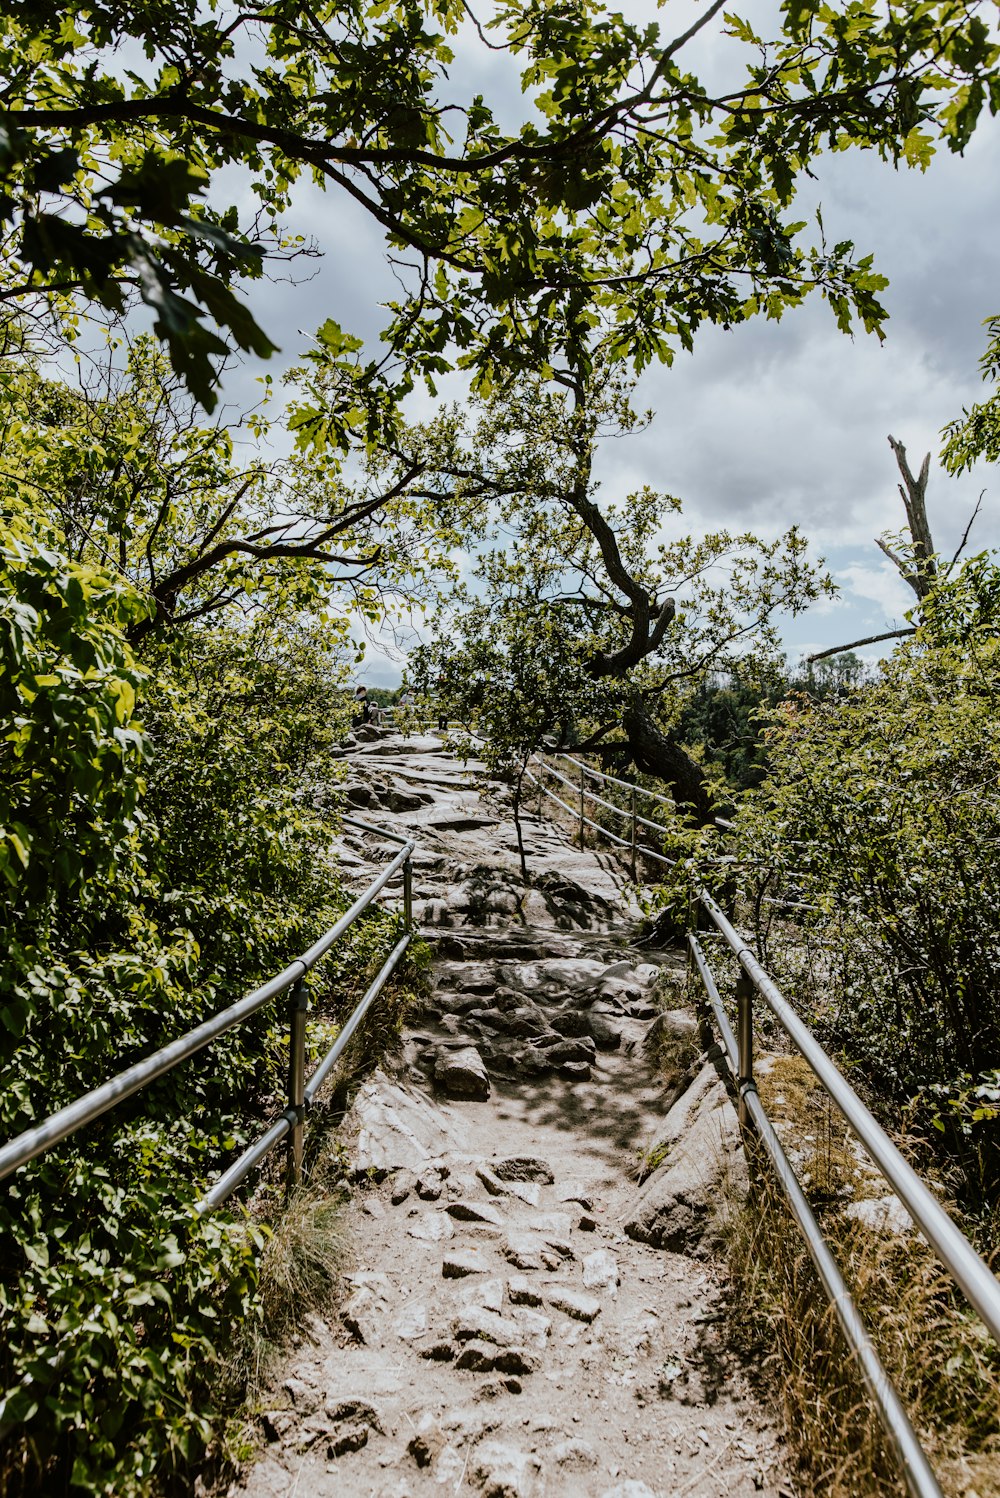 a rocky path with metal railings leading up to the top